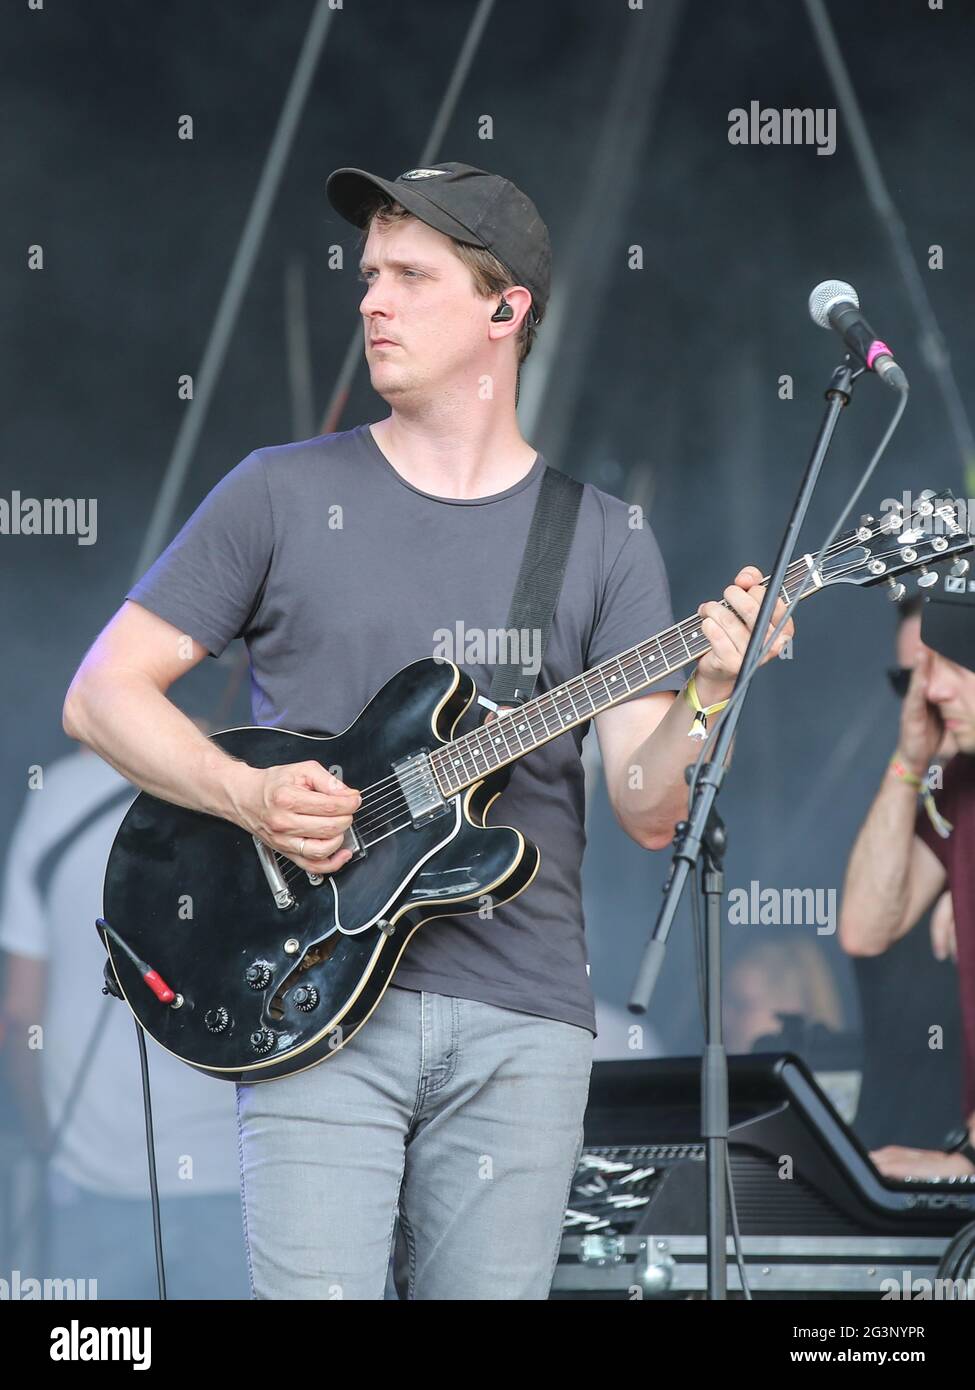 Guitarist Jonas Pfetzing from the band Juli at STARS for FREE on 25.08.2019 in Magdeburg Stock Photo